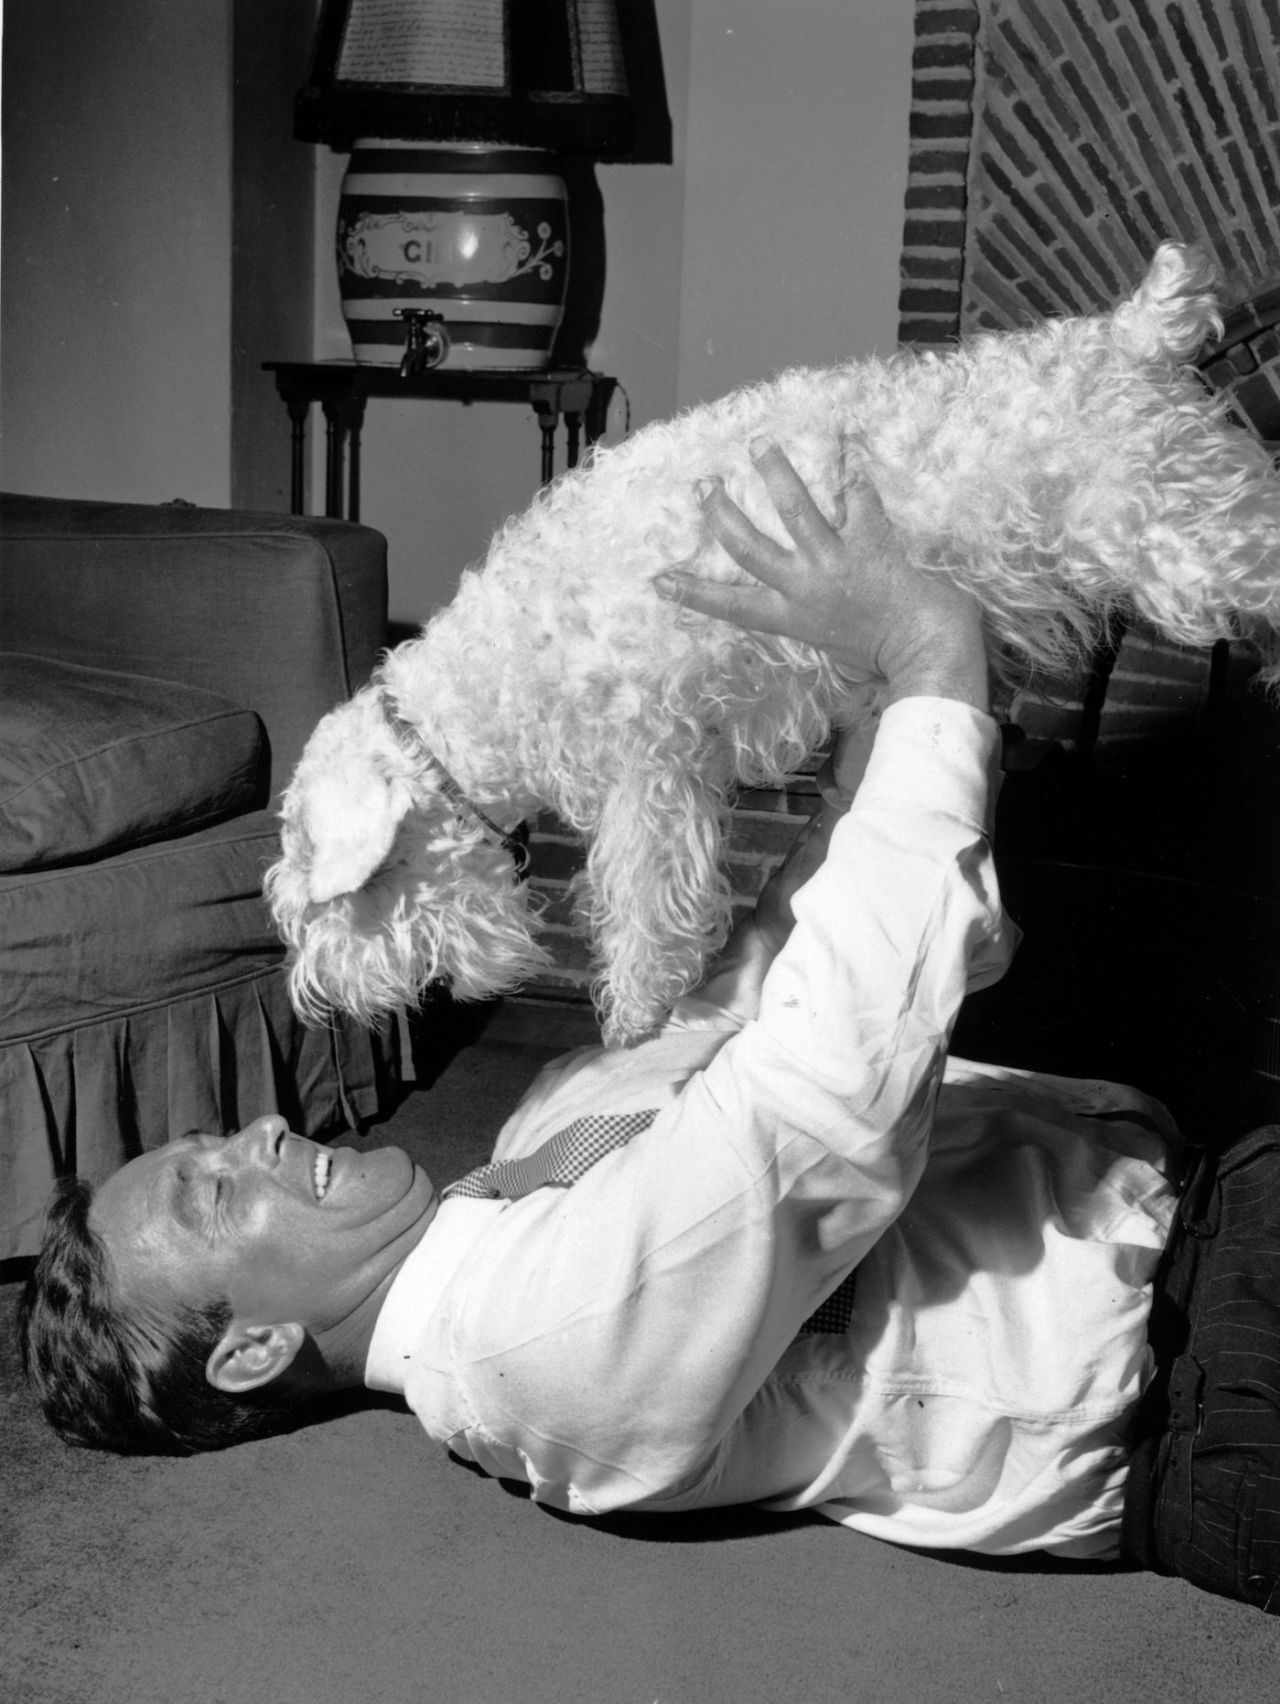 Denis Compton at home playing with his dog after an operation to remove his kneecap, England, September 1, 1956